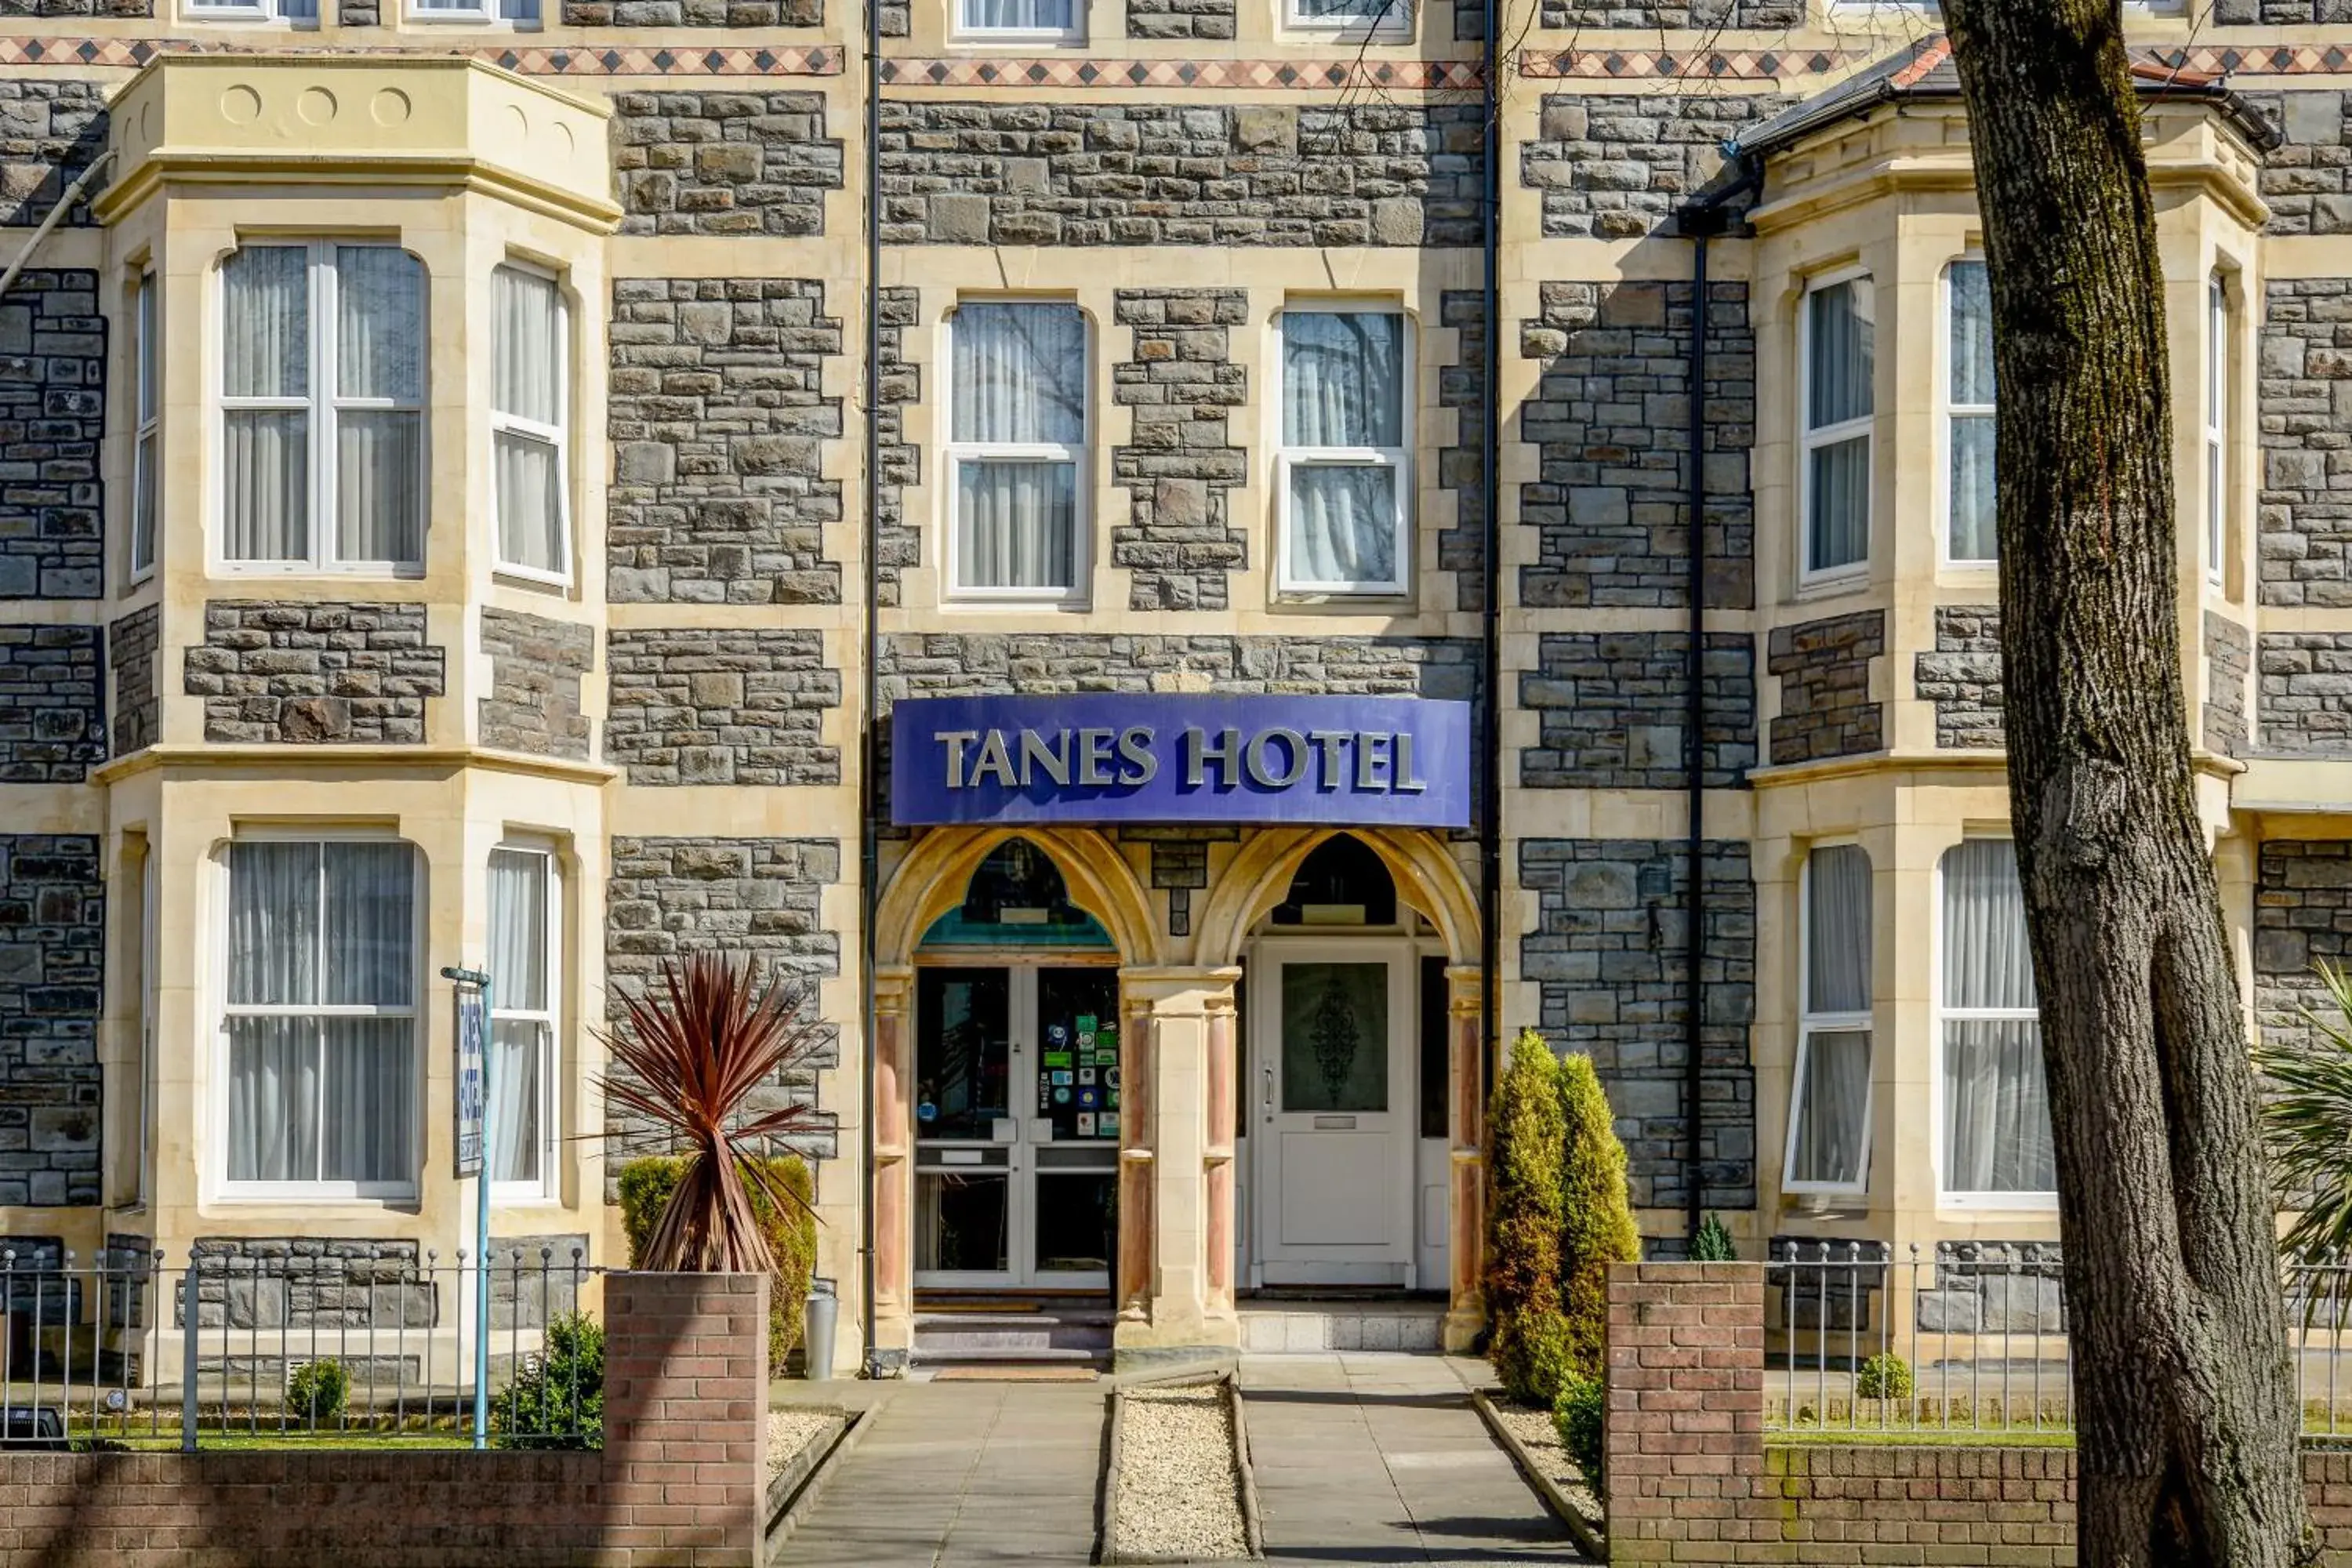 Property Building in Tanes Hotel